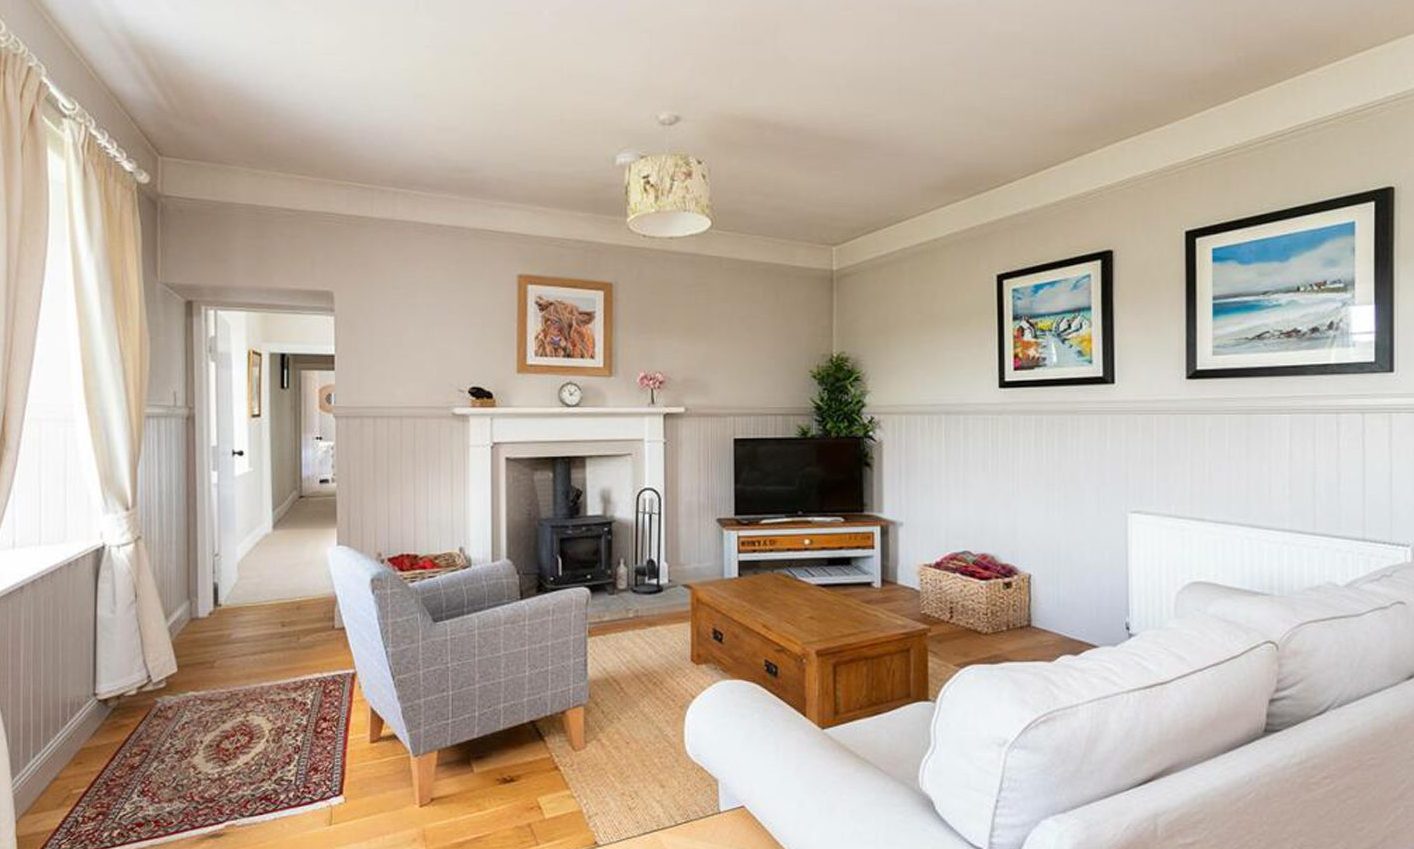 The living room at the Lundie cottage, with a white couch, grey armchair, fireplace and paintings on the walls